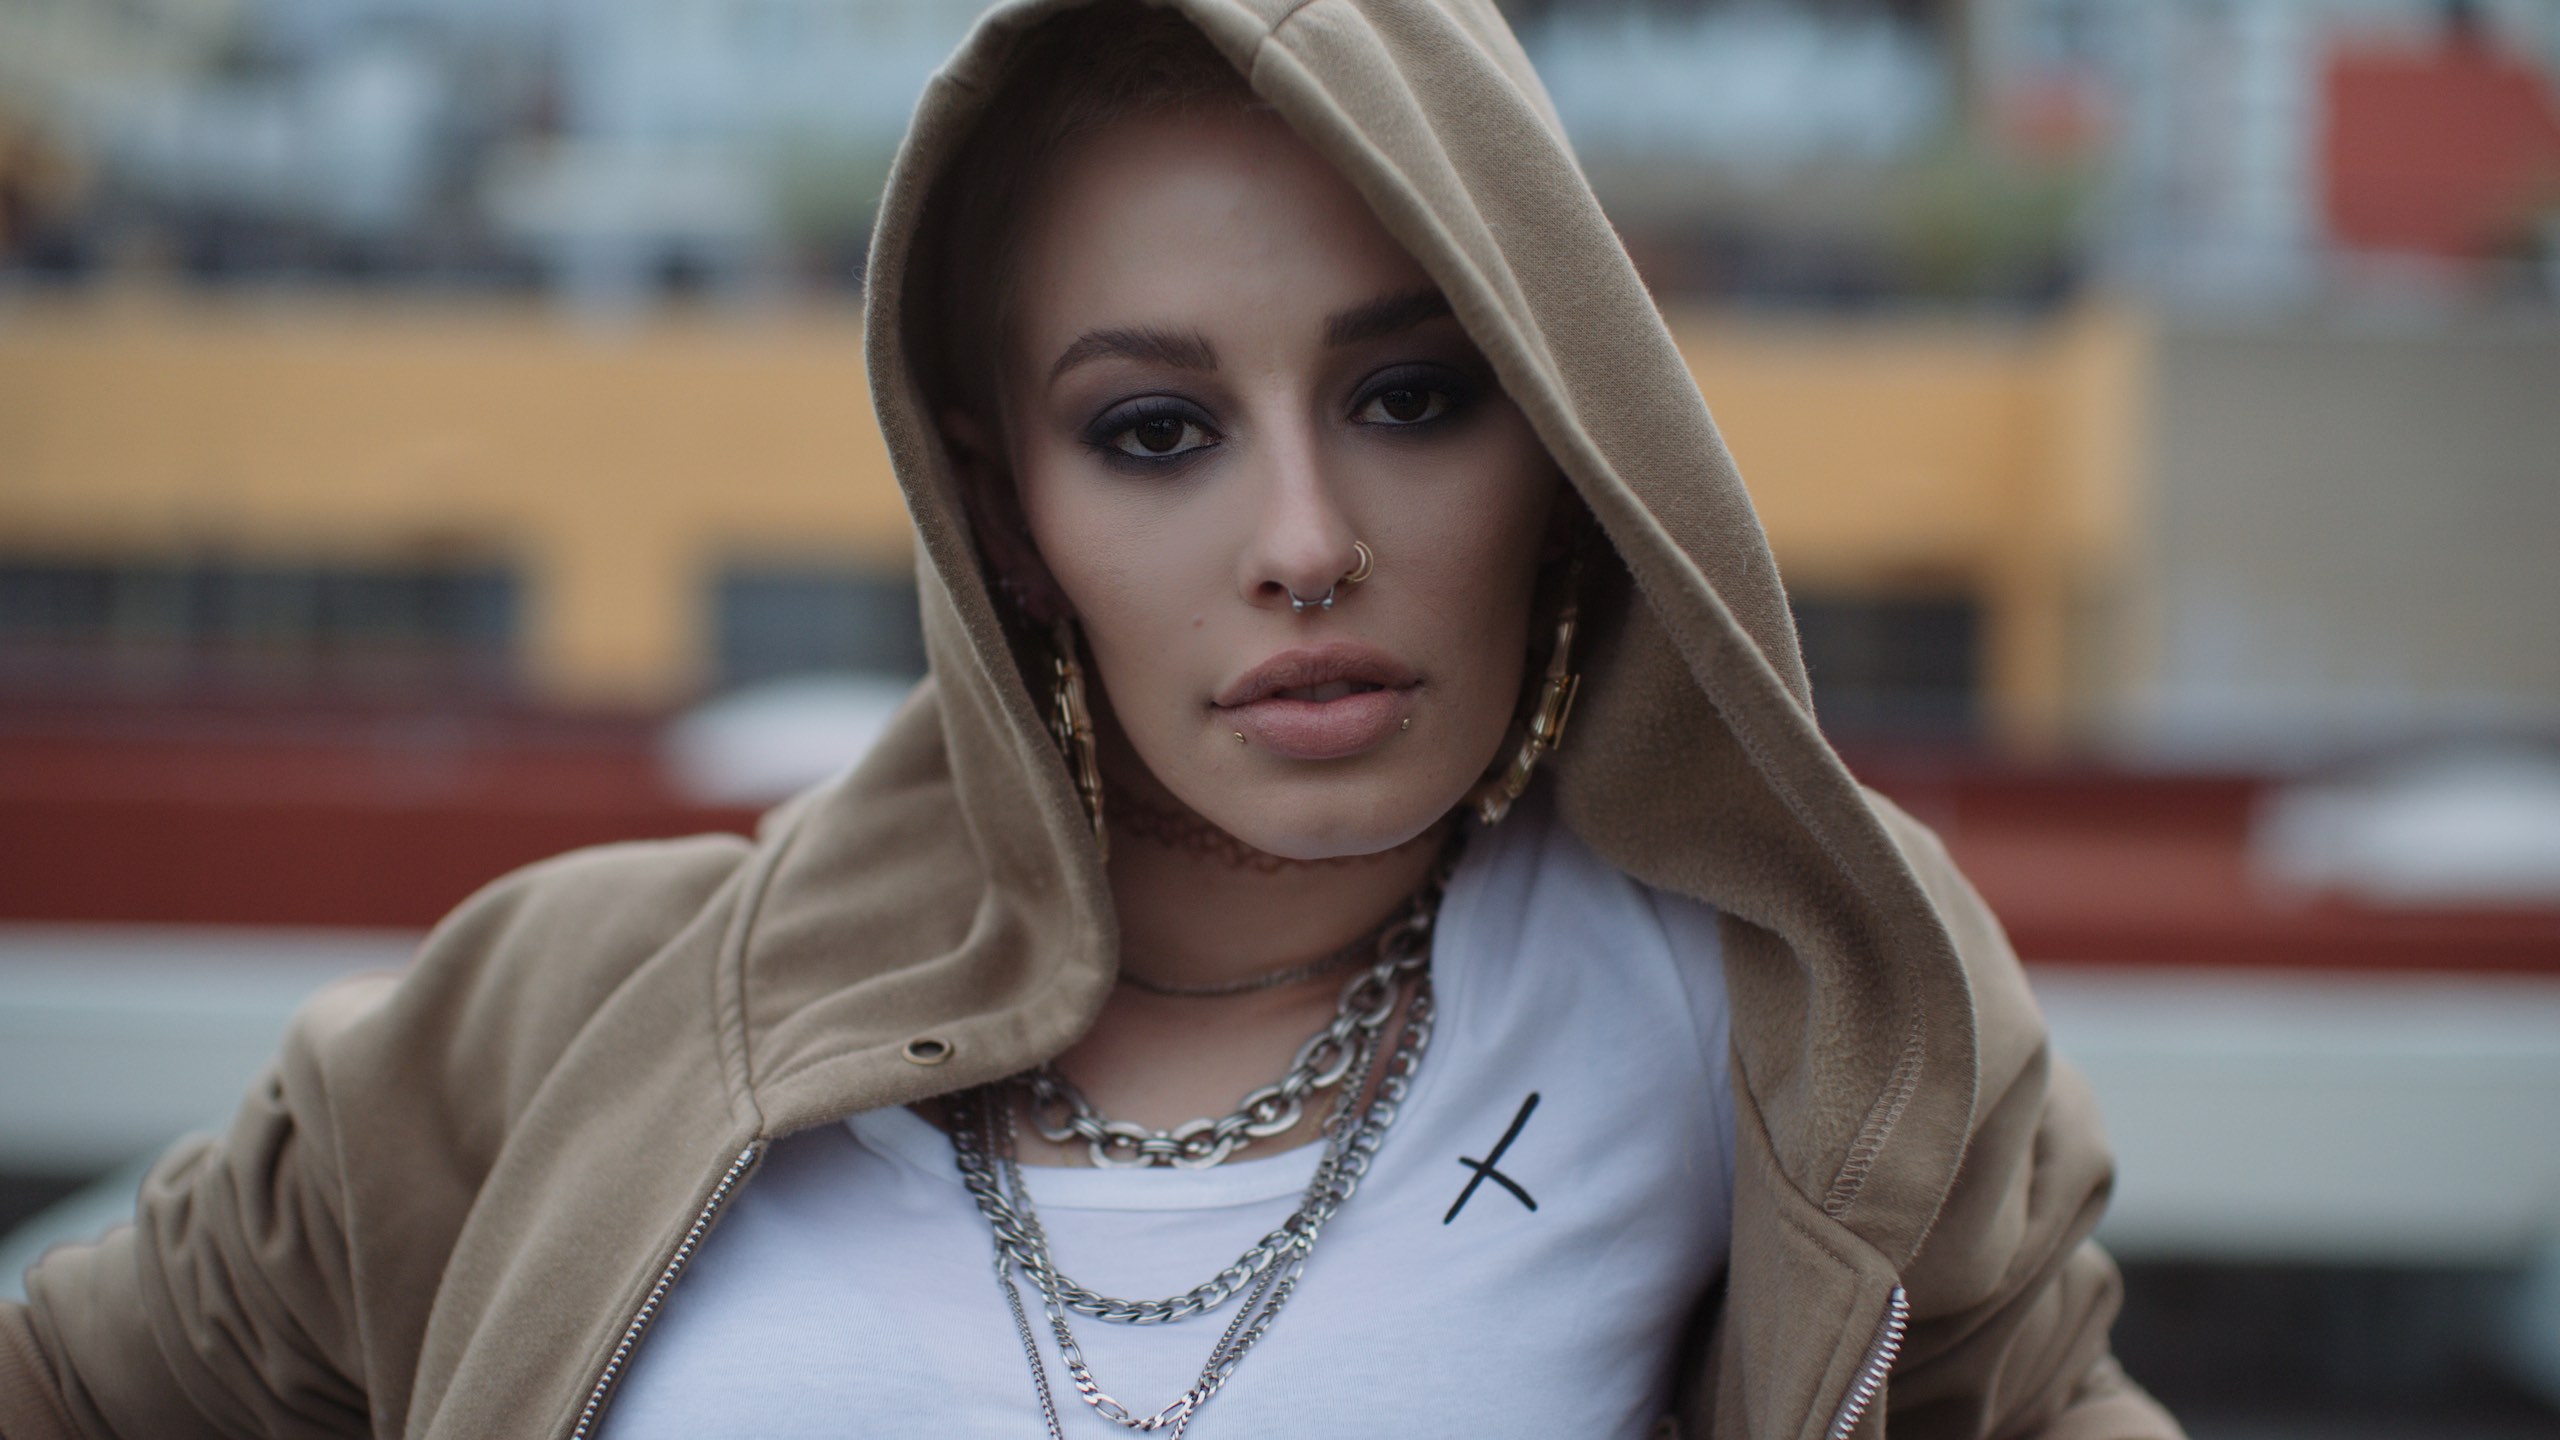 Uncreative Shop LA clothing company Headshot of woman with nose rings, earrings and chains wearing a beige hoodie